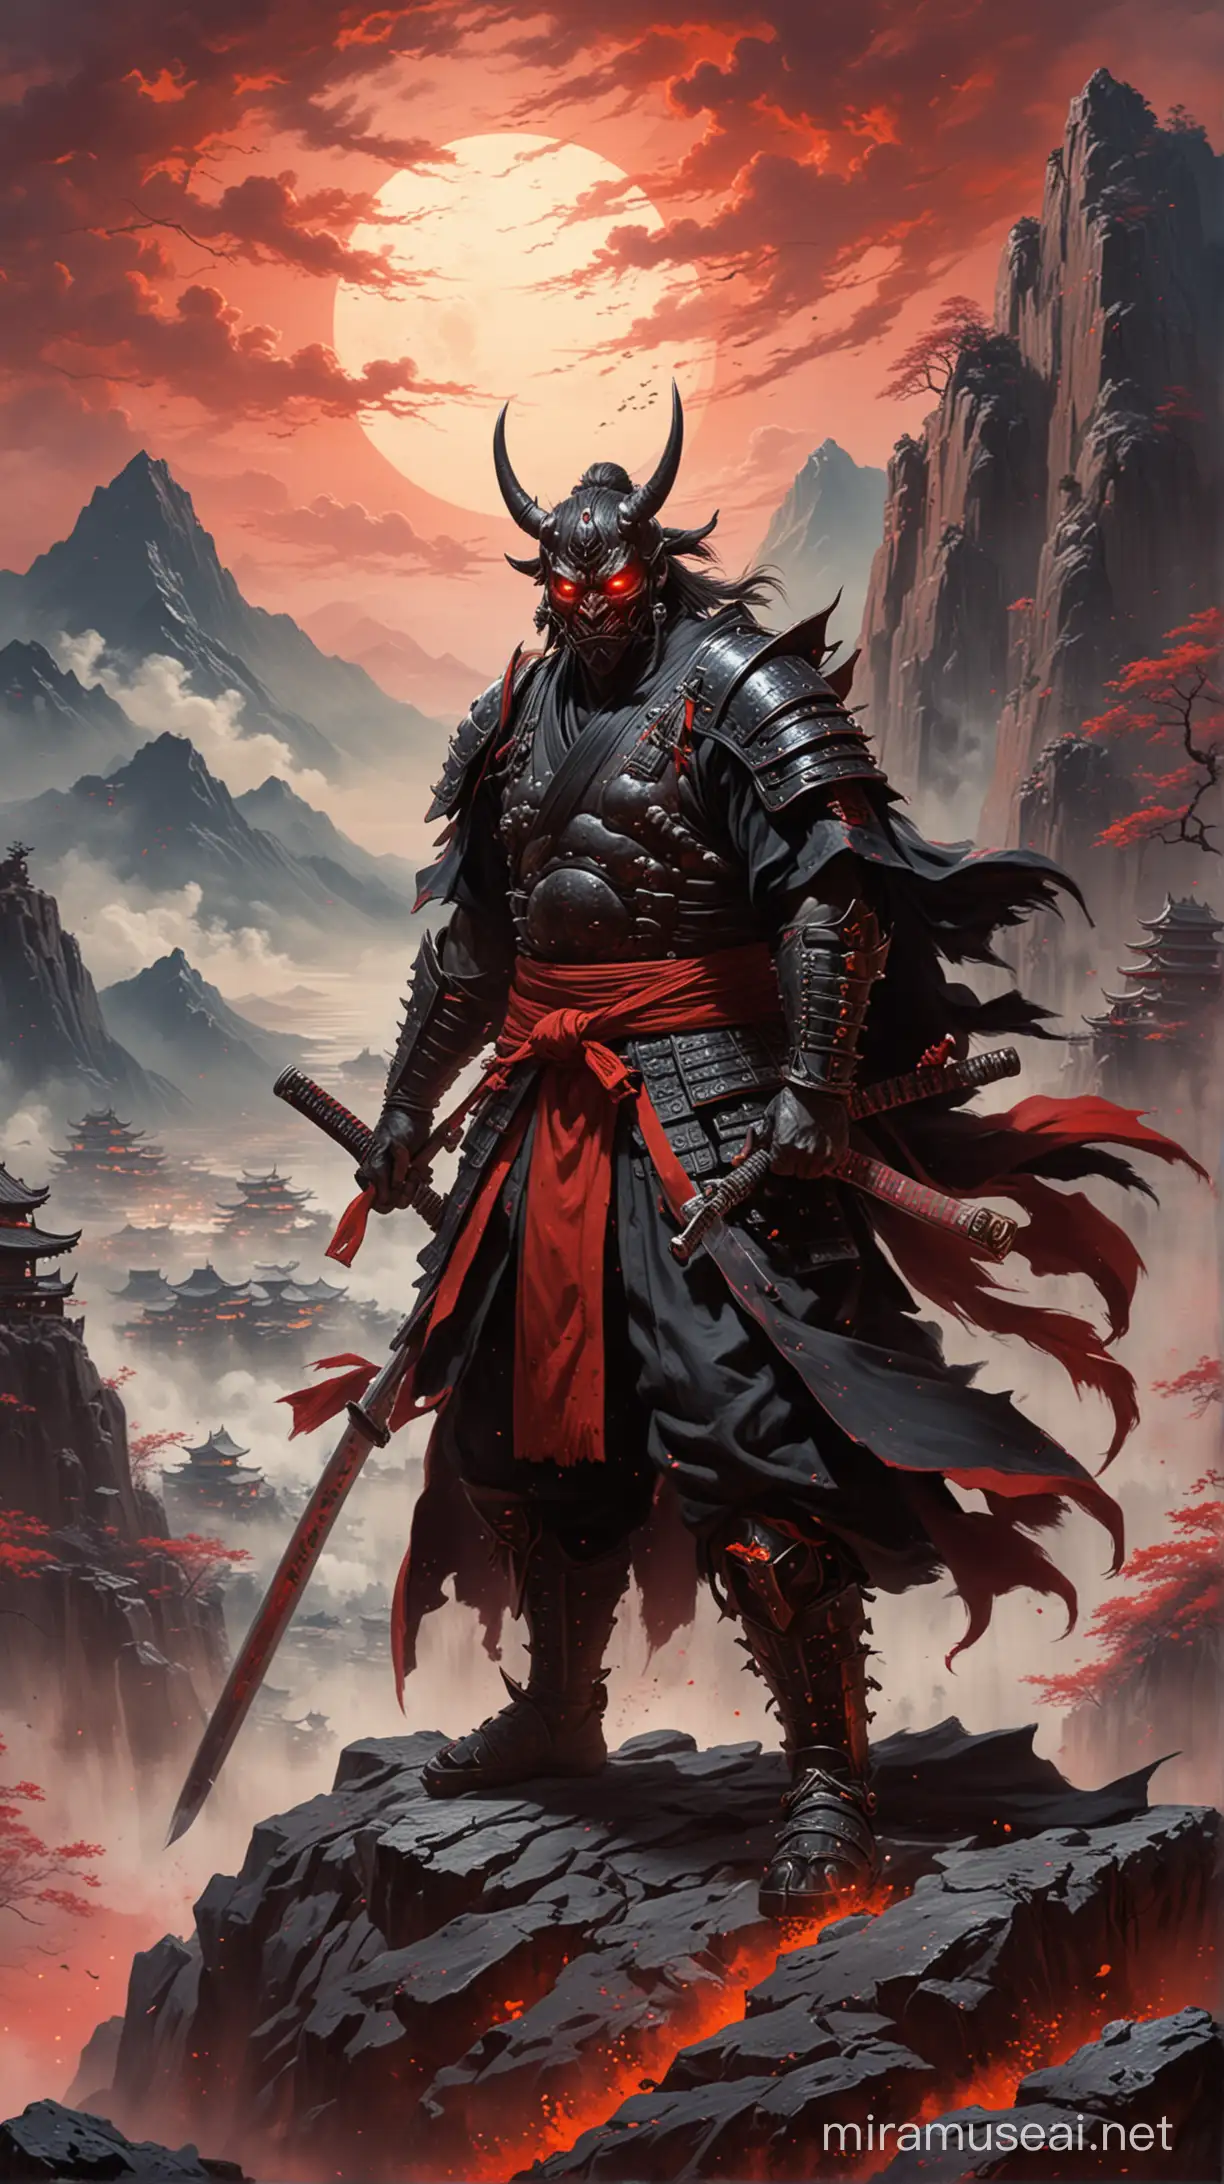 (masterpiece painting art), brutal samurai warrior, ((oni samurai)), red- glow eyes, in black-red samurai armour, holding katana sword, prepare to fight, standing on top of the mountain, the wind blows flaps of clothing, behind a Japanese fantasy city, the sky is covered with black magical ghosts, Frazetta, derpd, DarkSpheraStyle